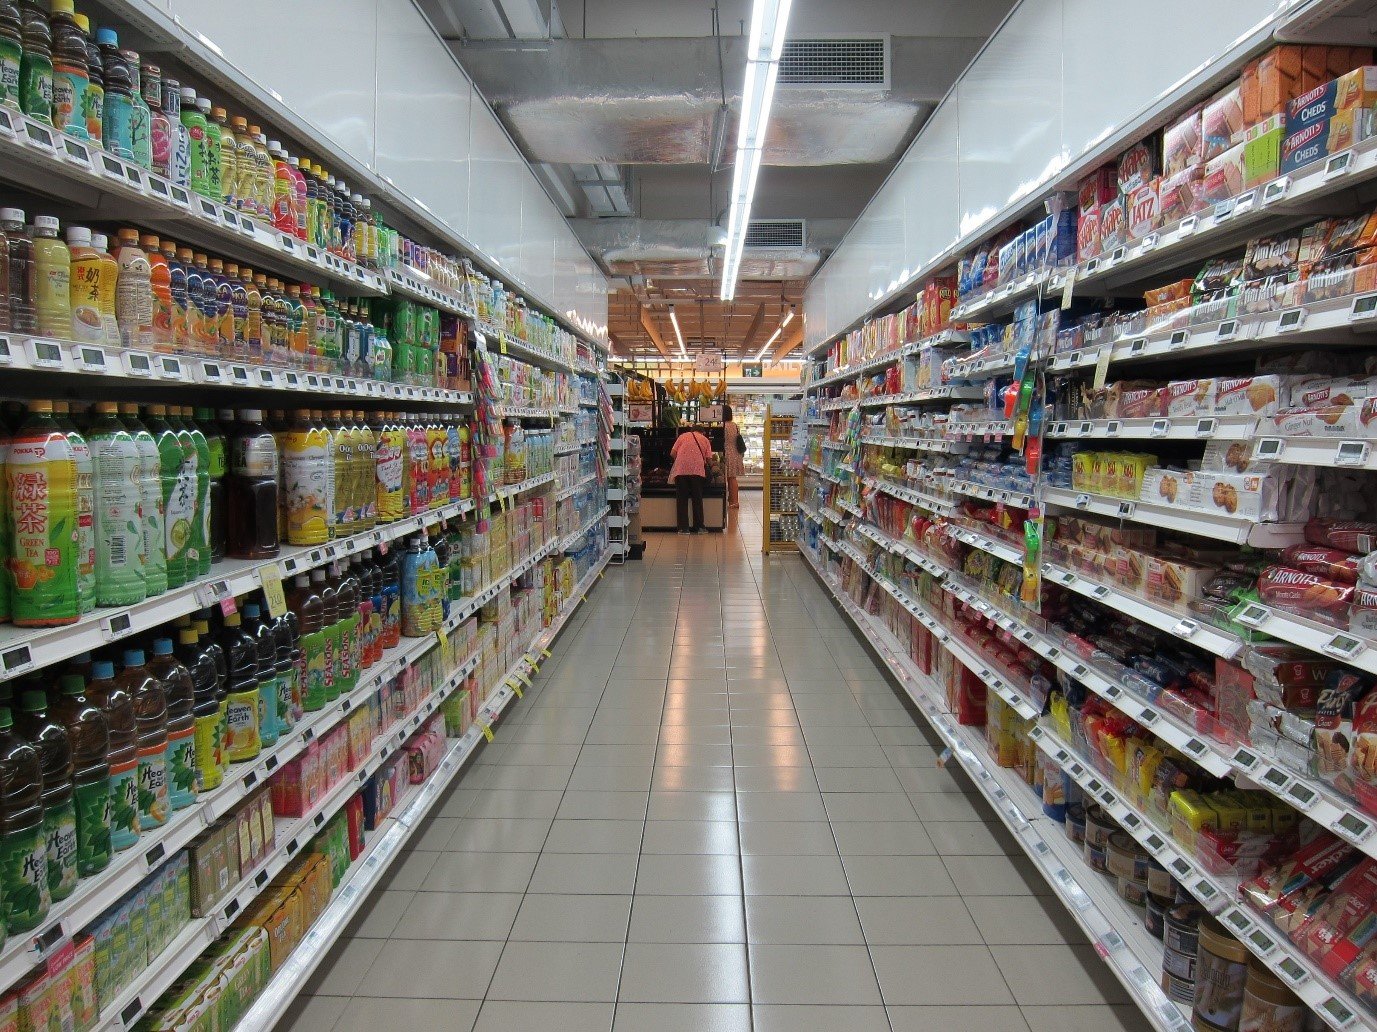 A grocery store, which contains zones with different environmental needs, as well as refrigeration, has an unpredictable load cycle and is a prime example where HVAC optimization is needed.